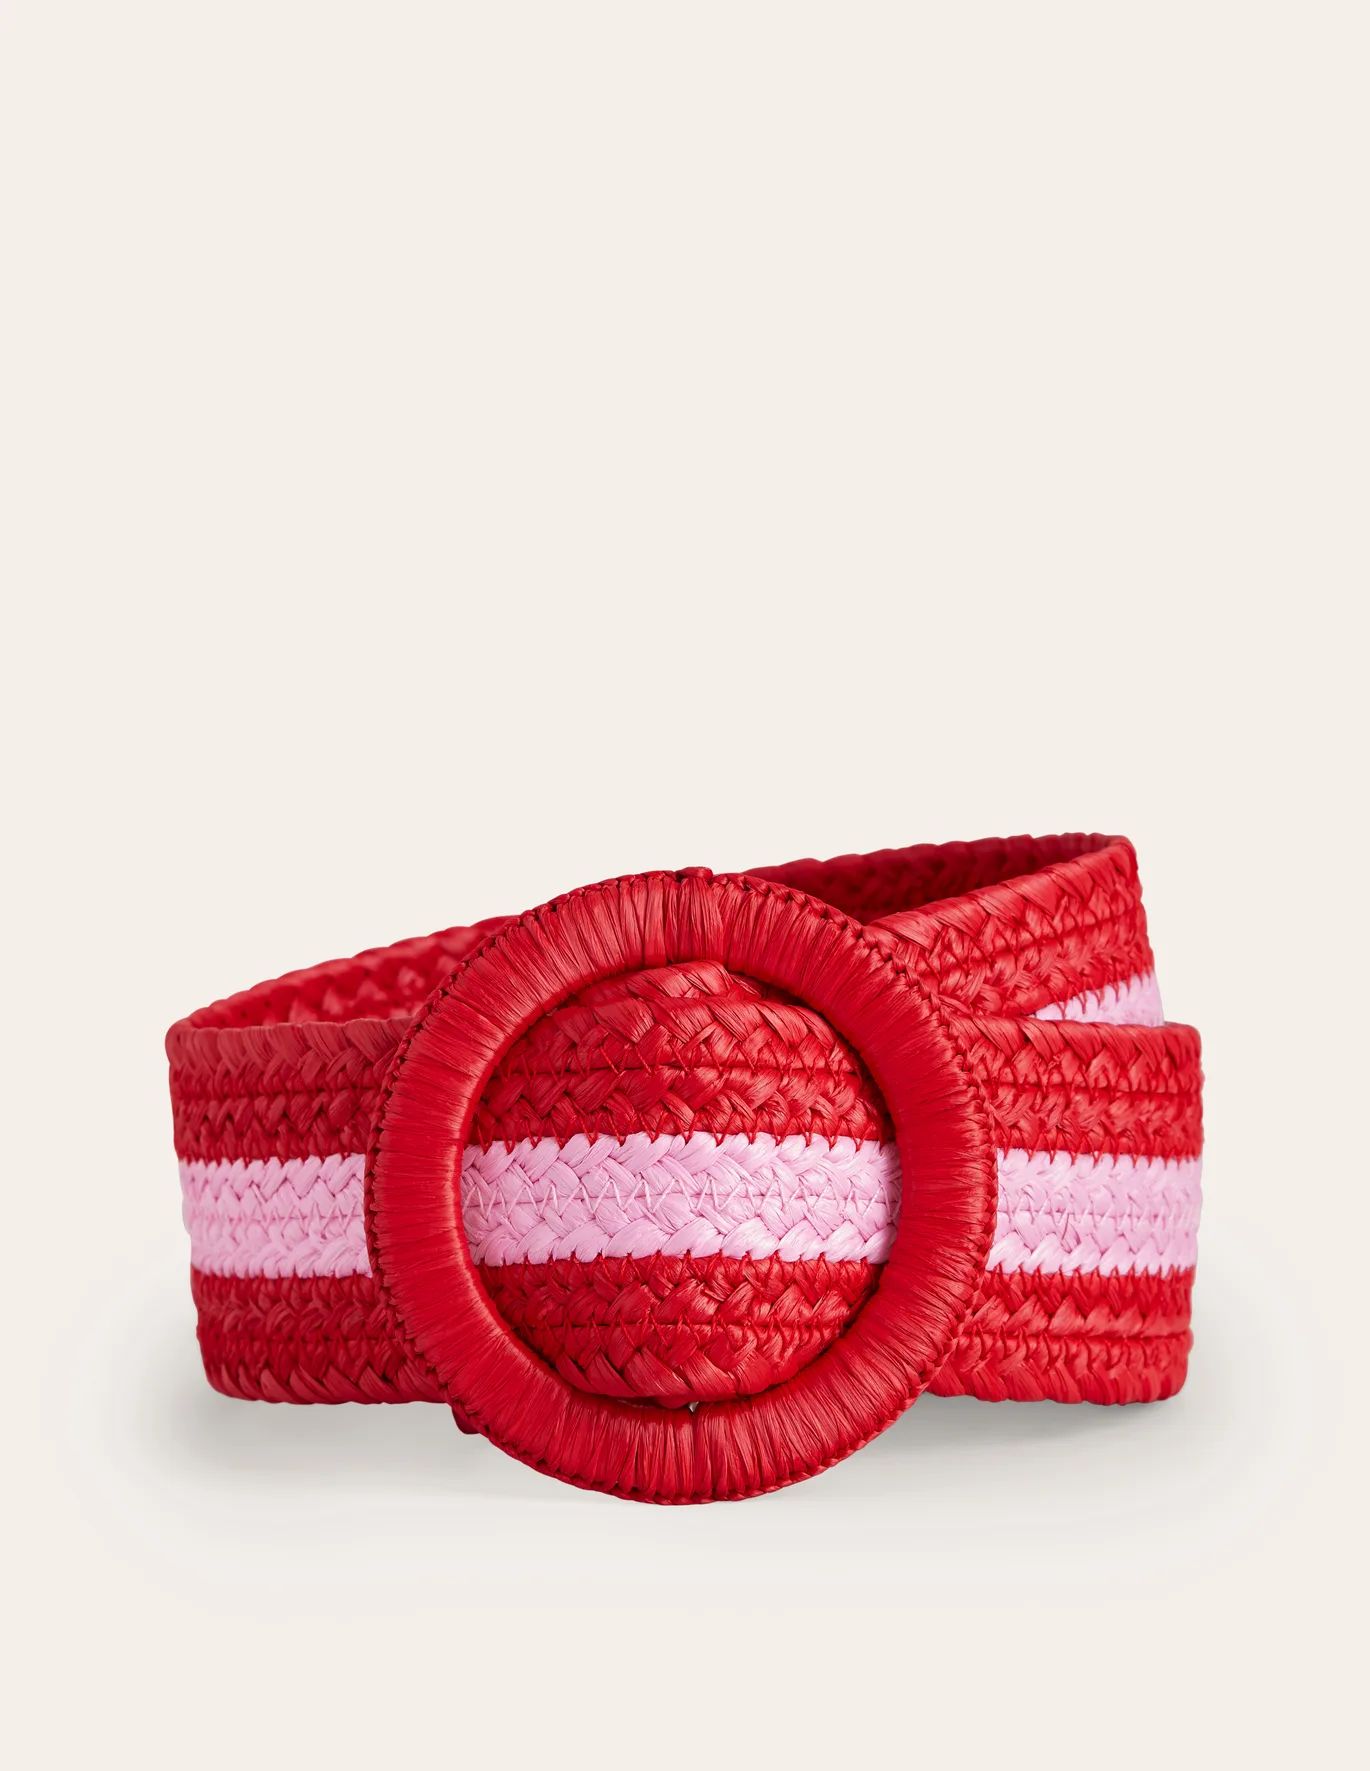 Post Box Red and Pink | Boden (US)